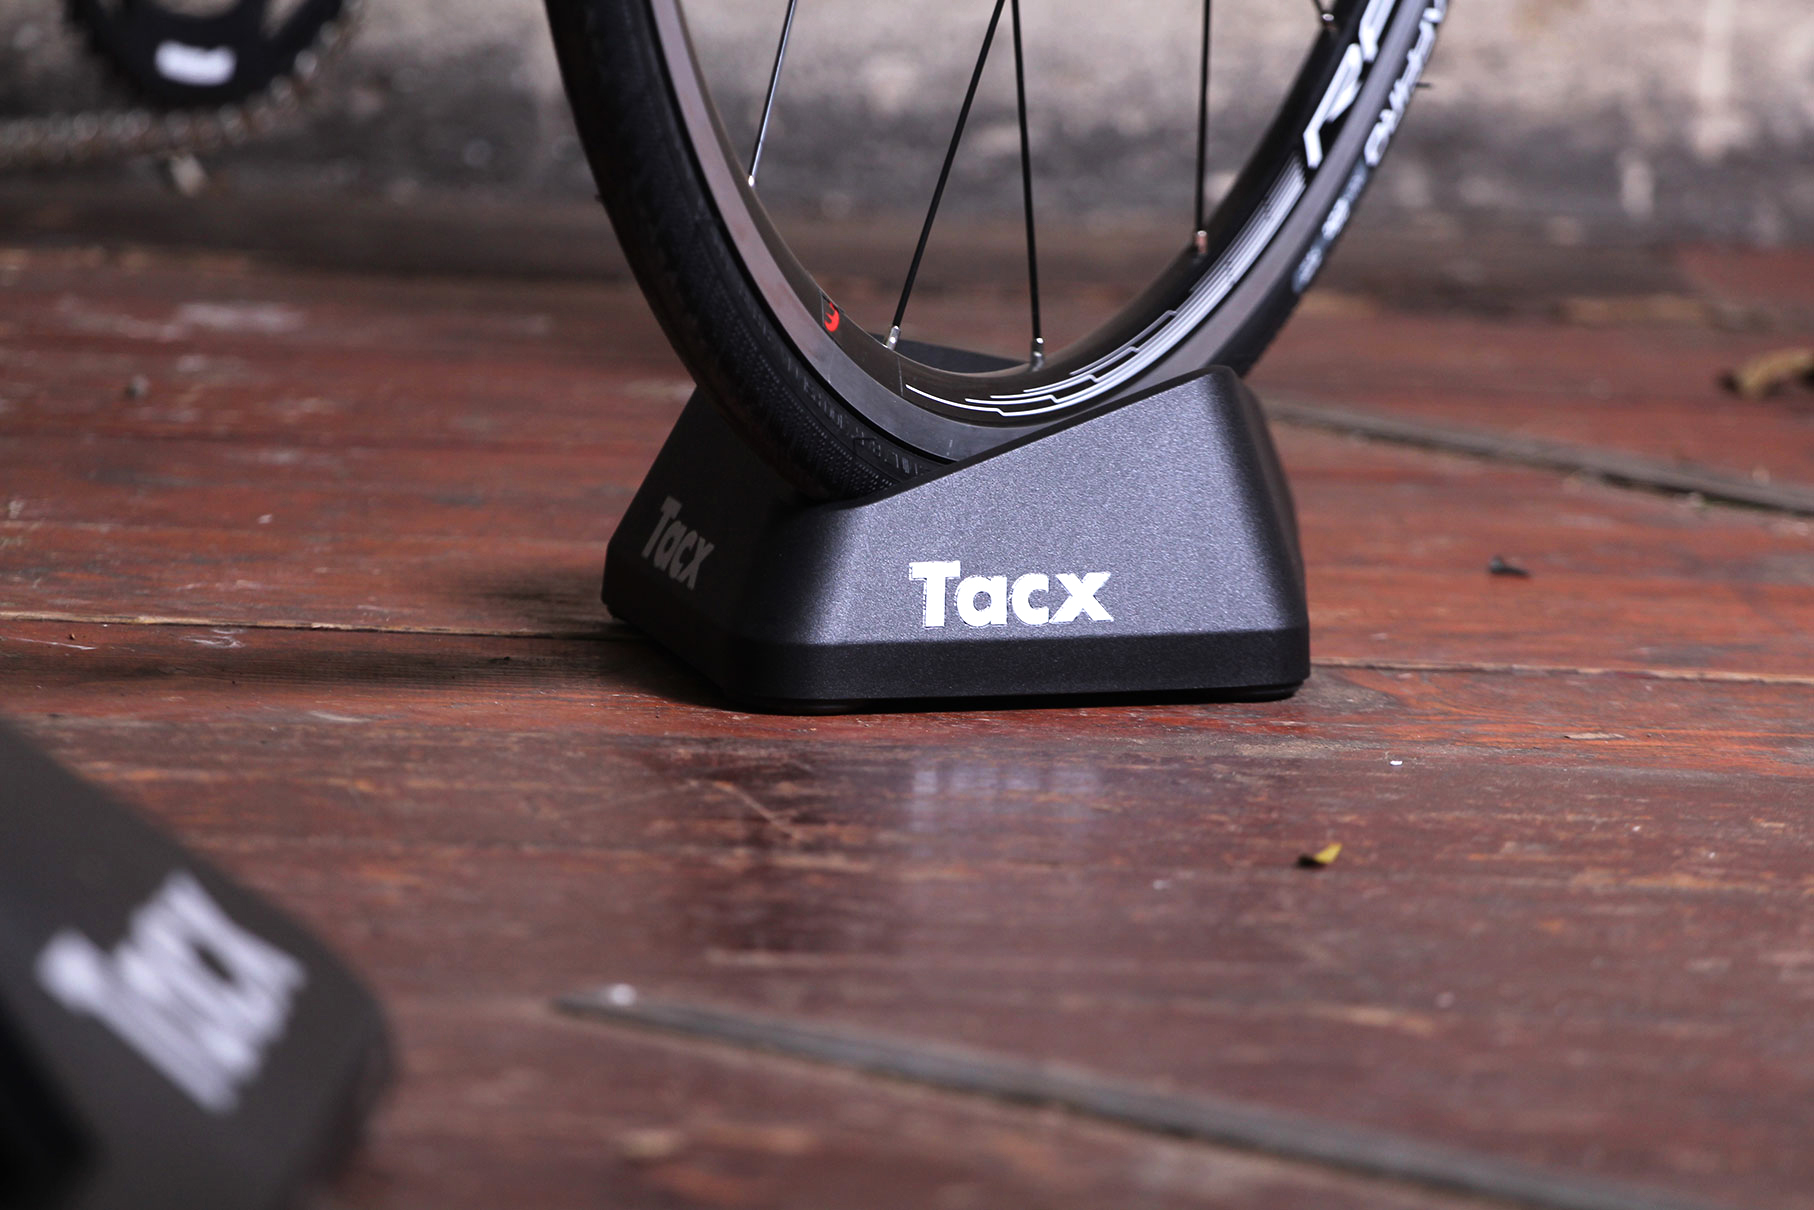 Review: Tacx Neo T2800 | road.cc